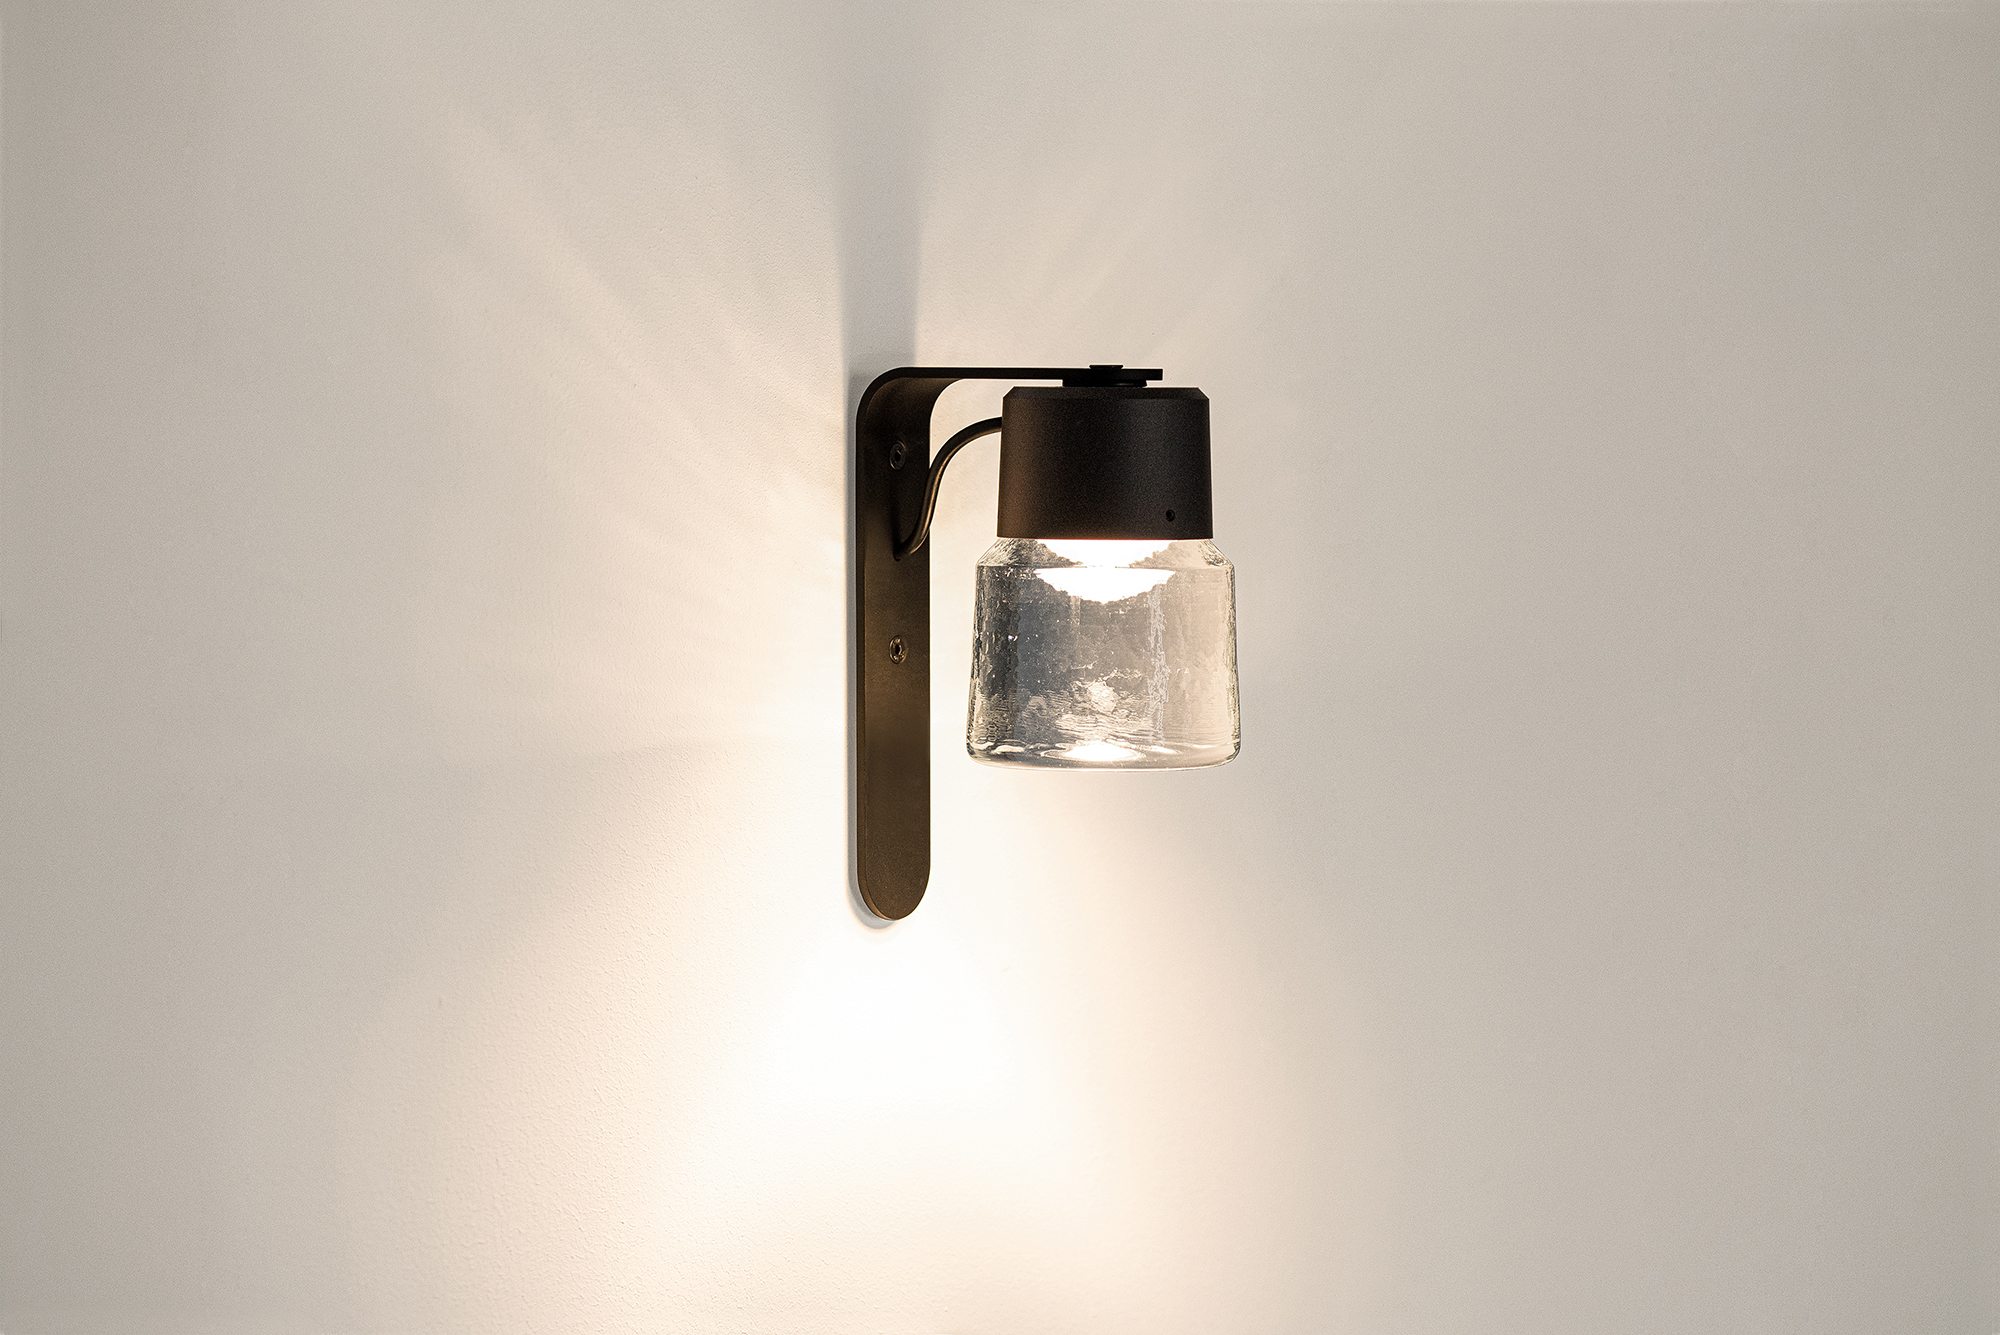 Cast LED wall lamp made of cast glass and black anodised aluminium.